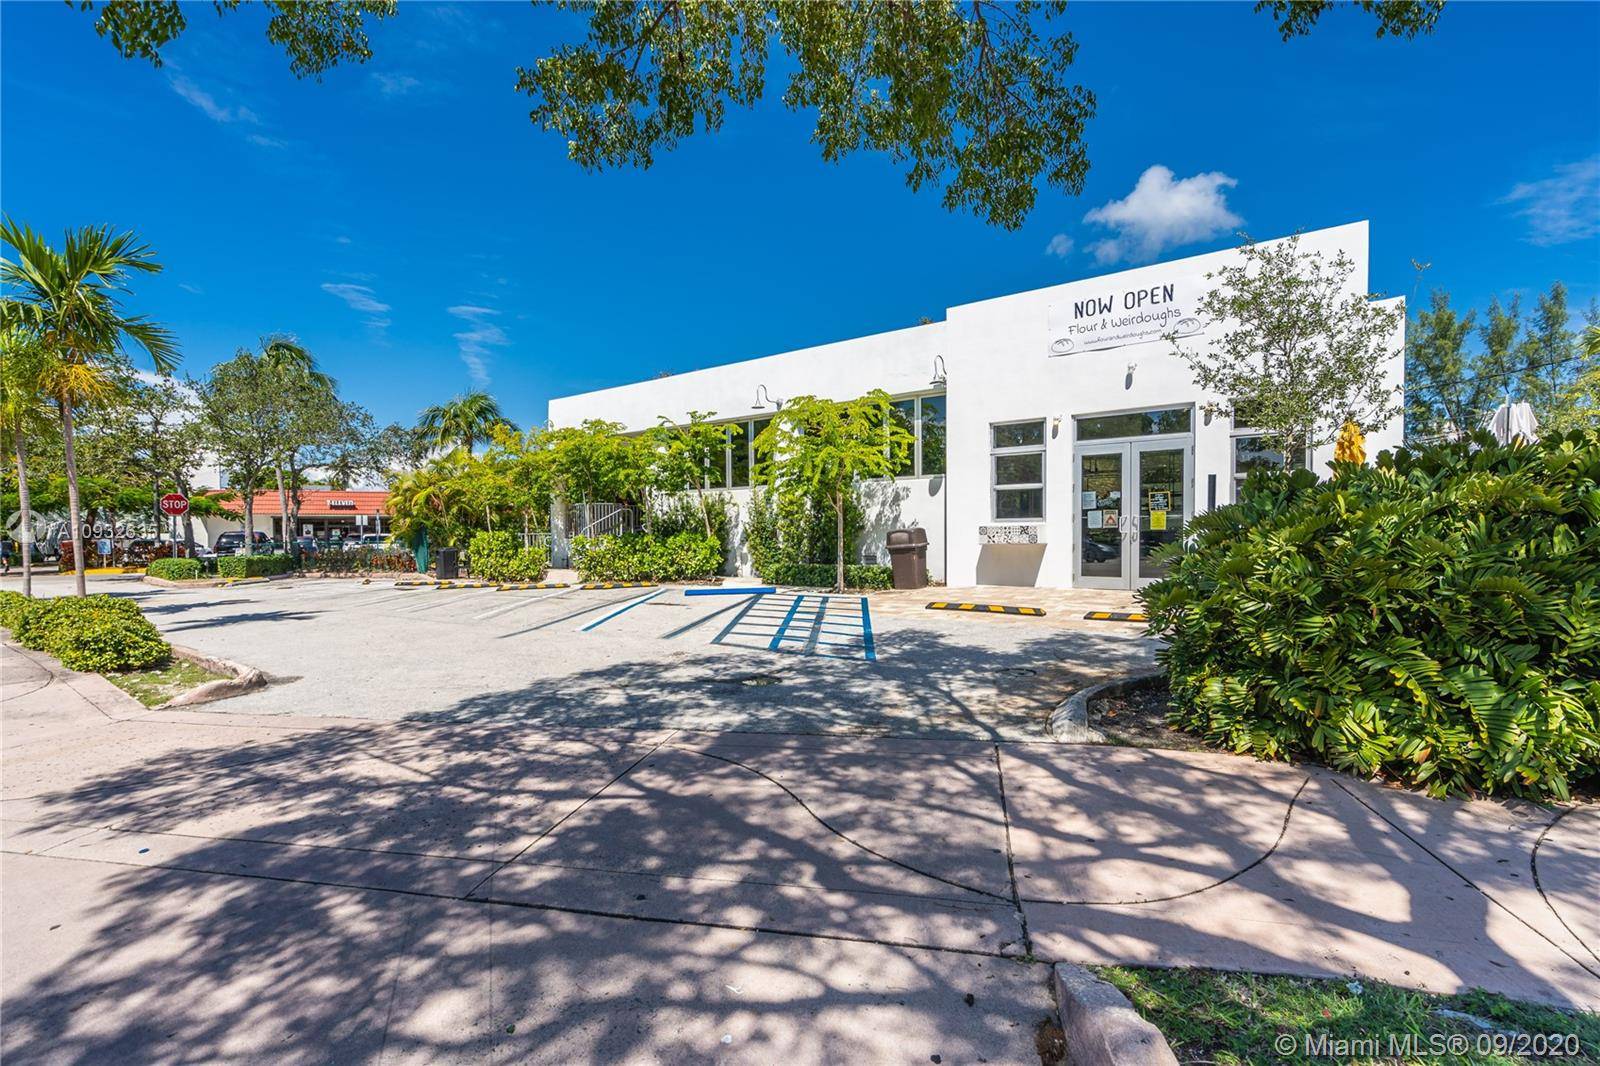 Amazing Opportunity to purchase the Oasis Cafe location in the Village of Key Biscayne located on Harbor Drive right at the entrance of the village.